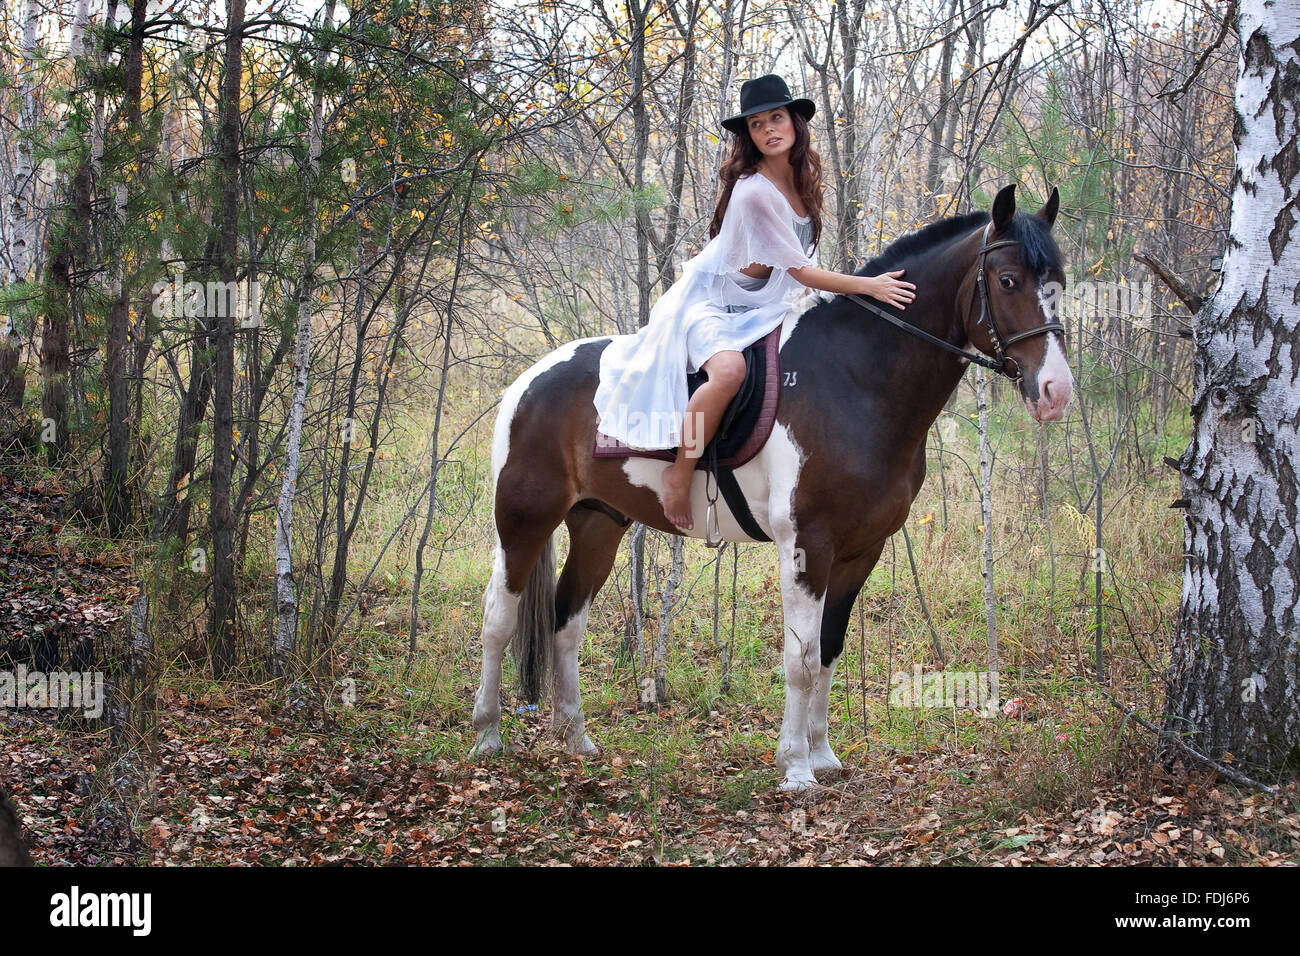 horse women animal young female riding outdoors girls adult rural pets  beauty caucasian portrait beautiful woman nature people Stock Photo - Alamy